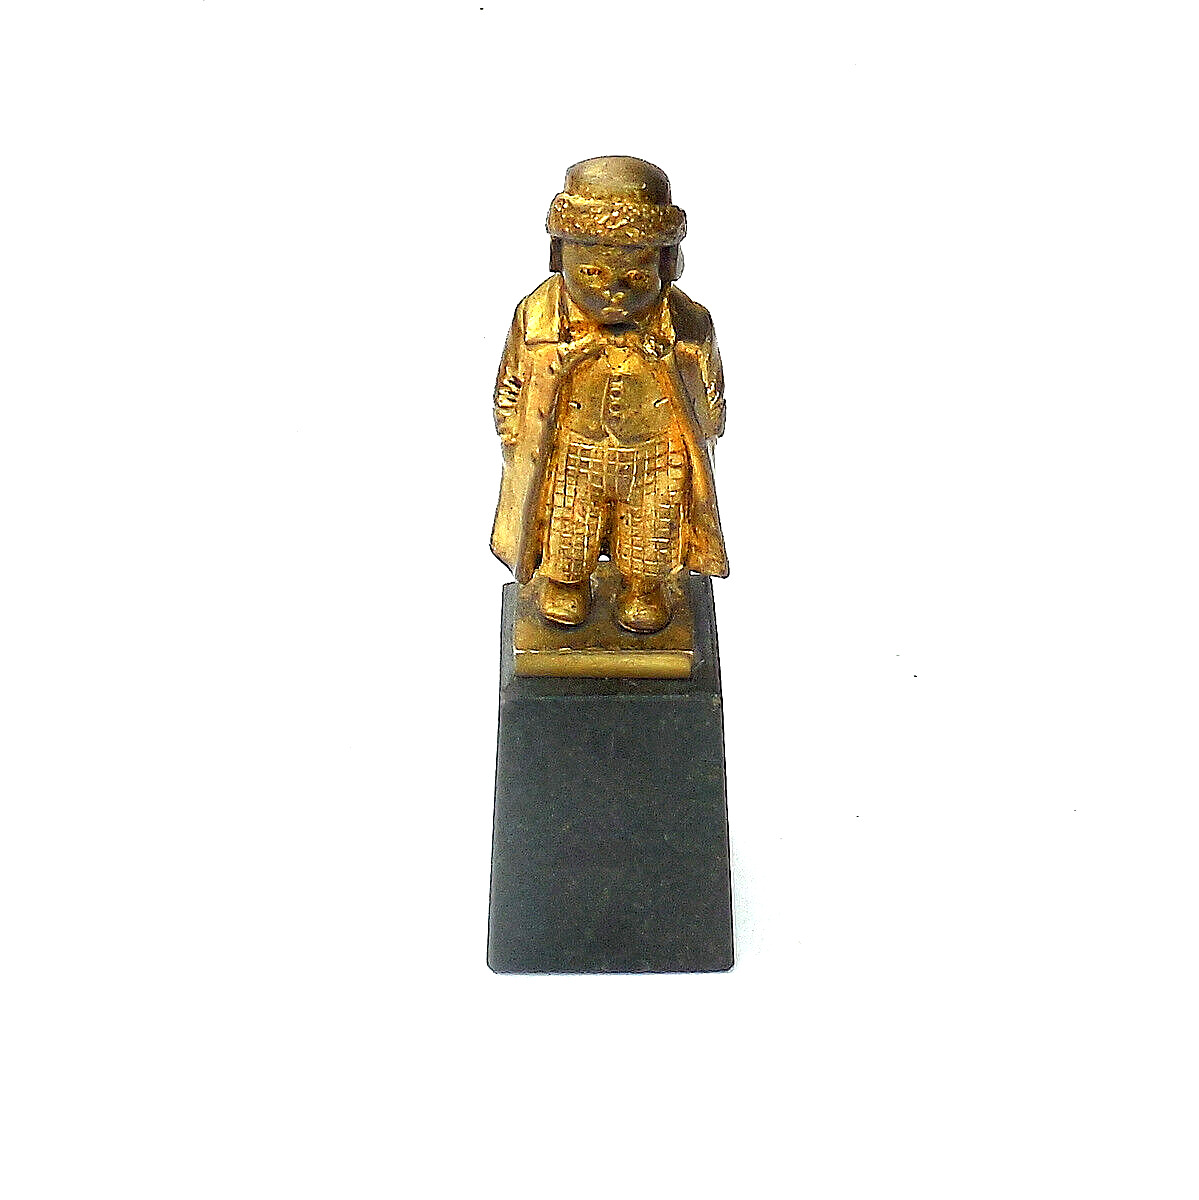 Antique Gilt BRONZE Miniature Figurine of a Young Boy on Black Marble Base c1910